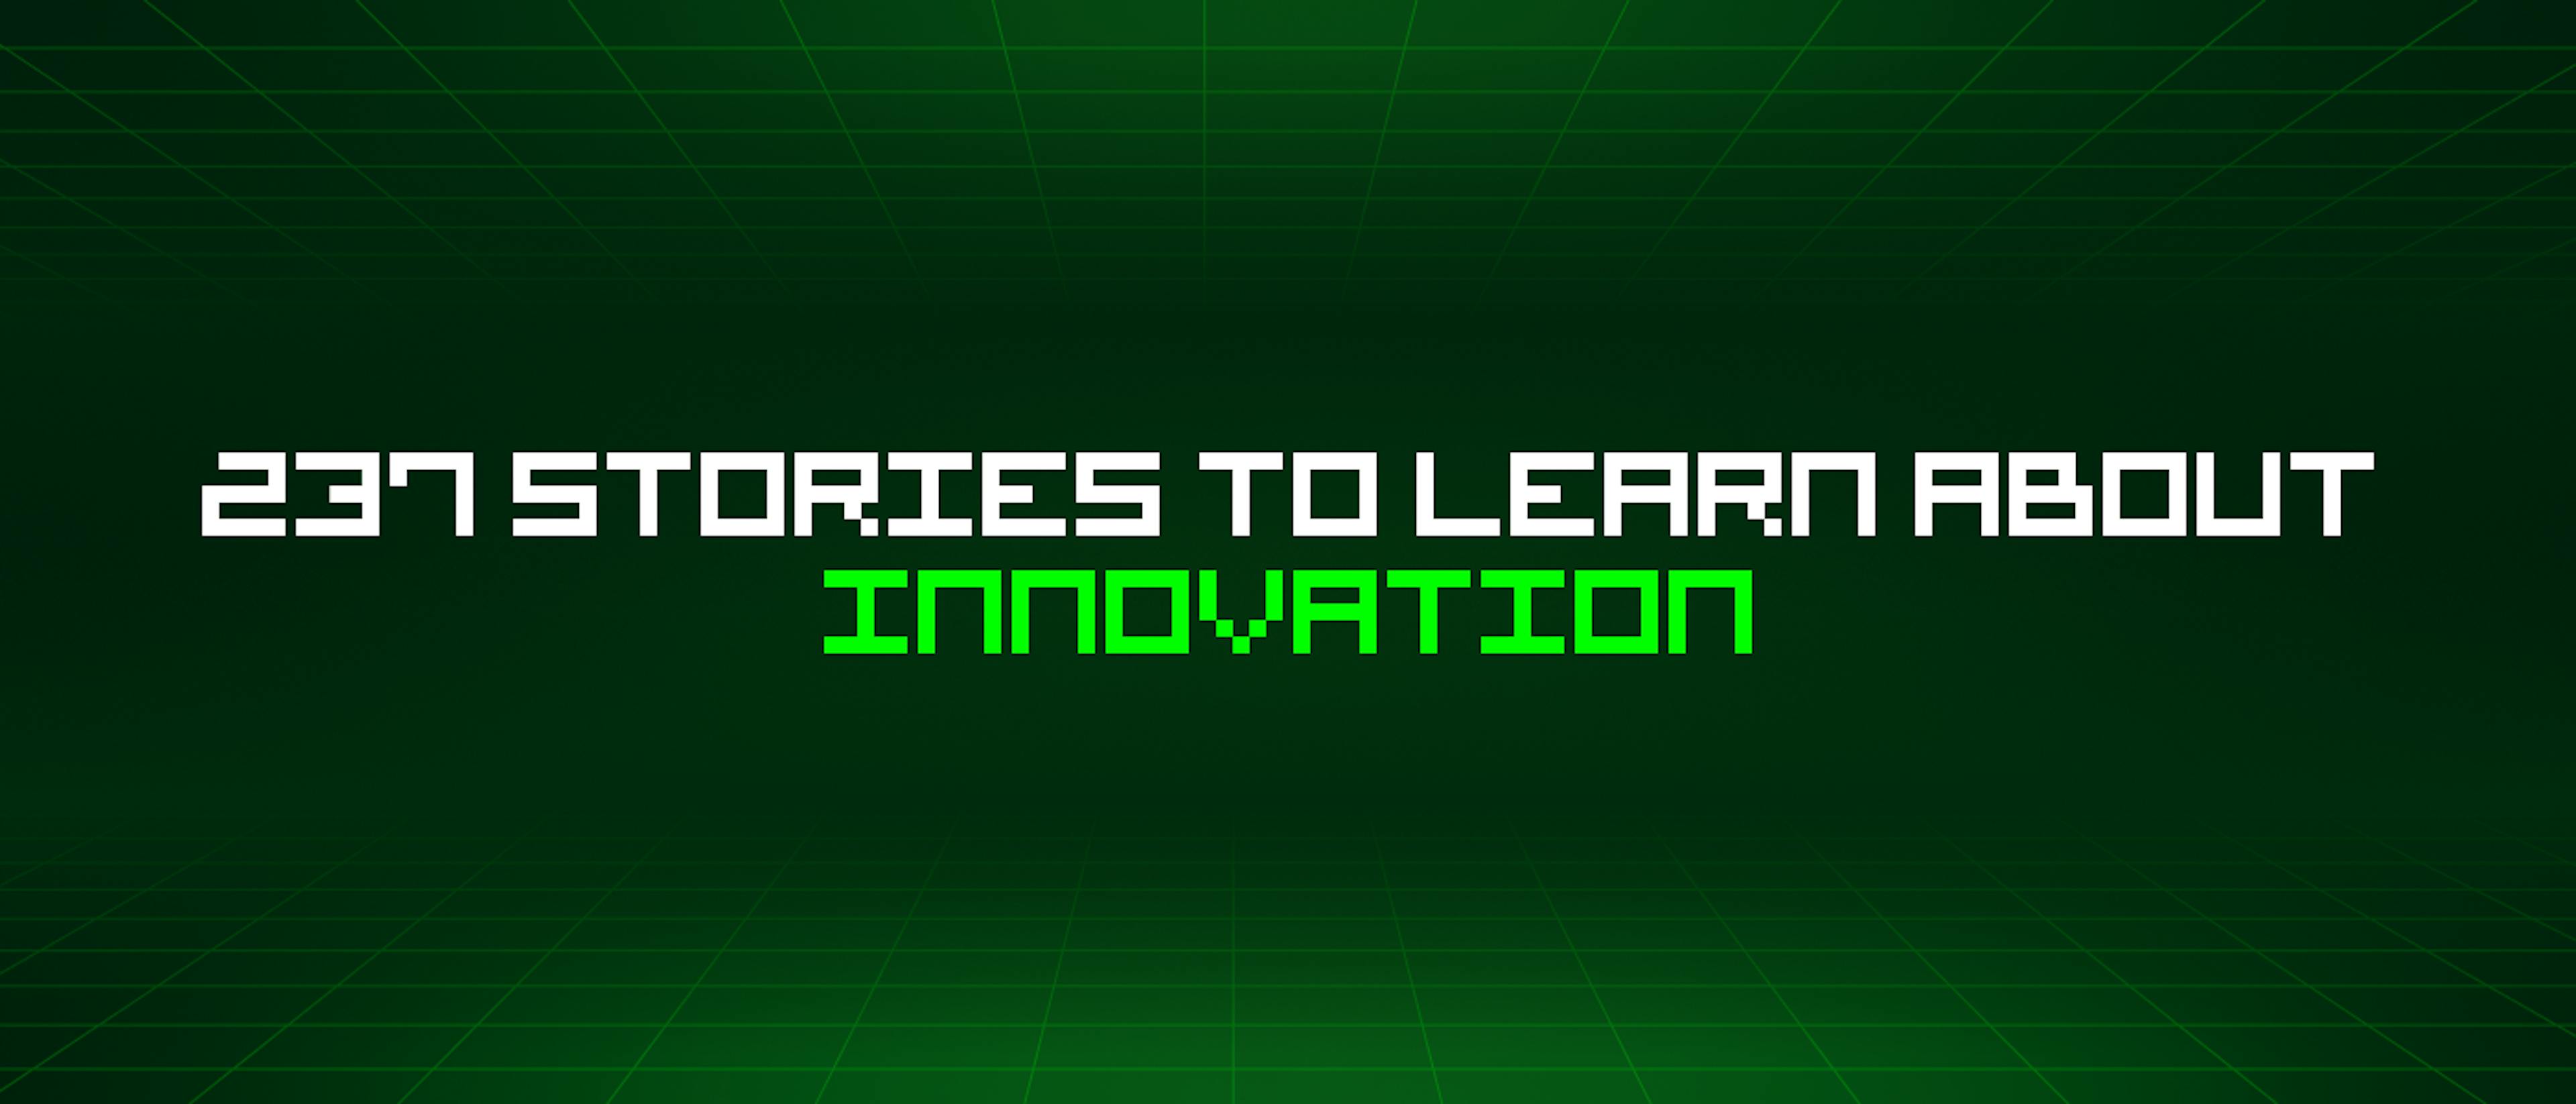 featured image - 237 Stories To Learn About Innovation